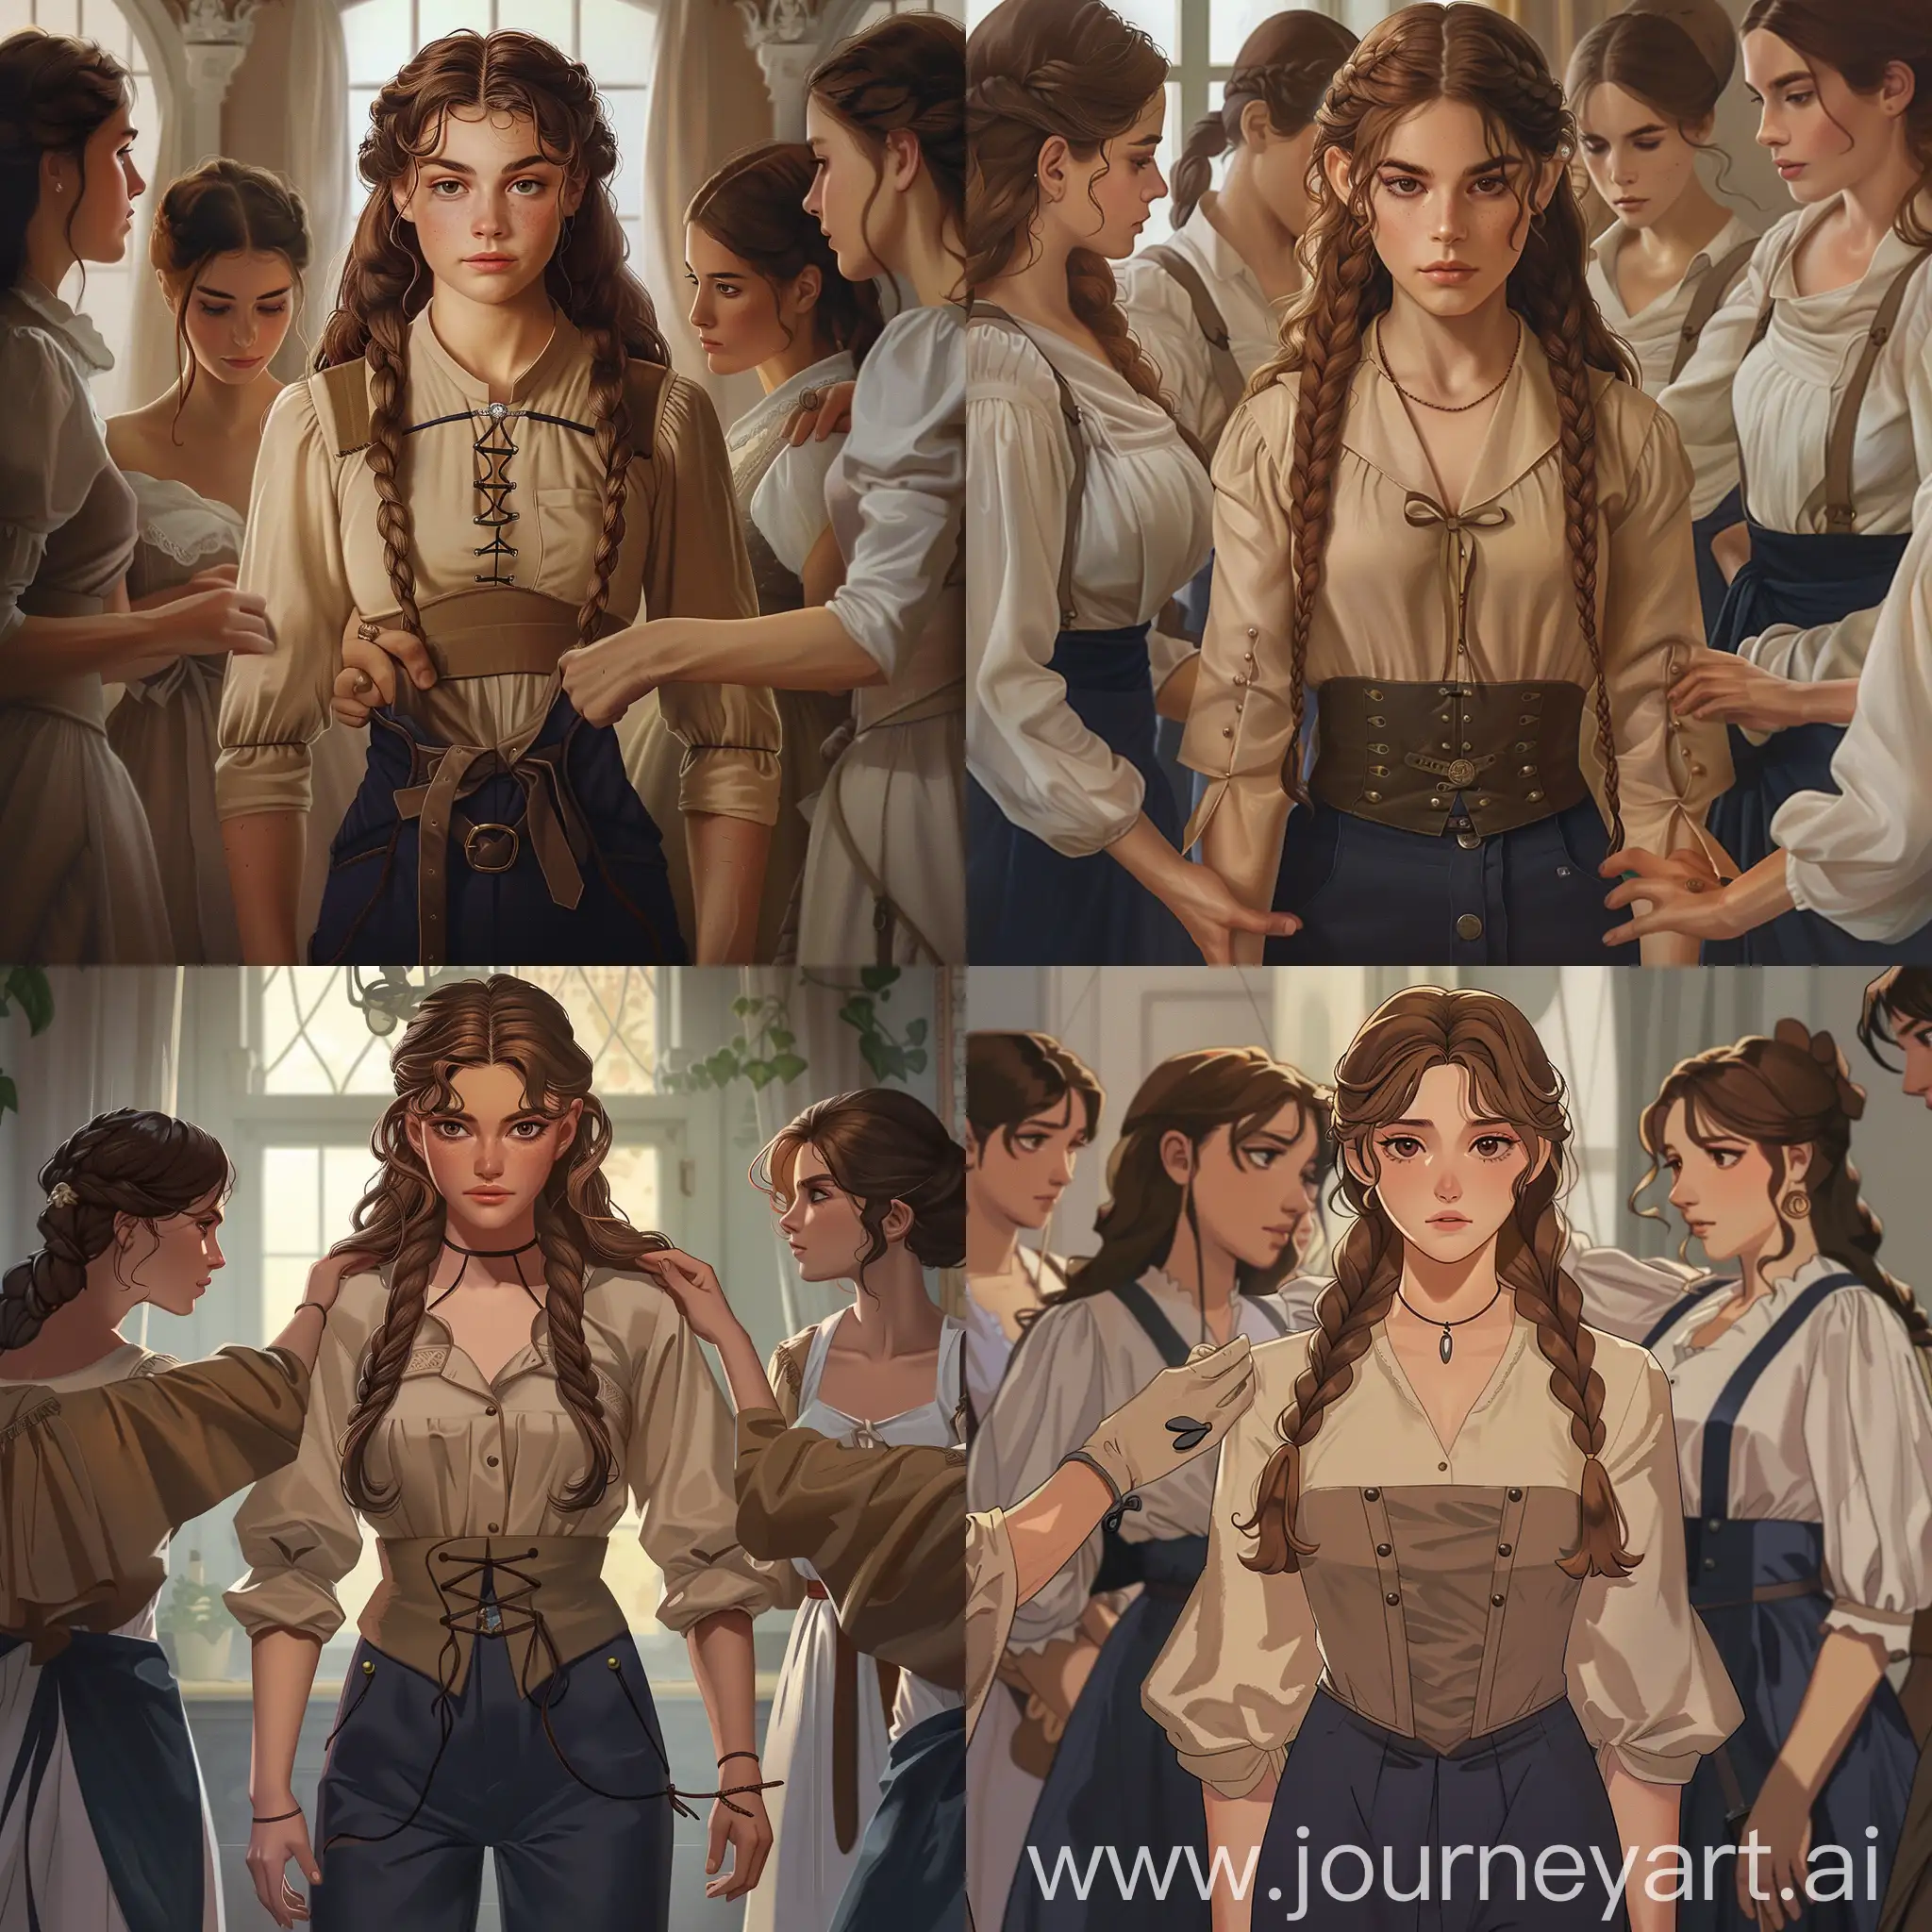 A young, brown-haired, human princess is getting ready for her first diplomatic mission. She is surrounded by her maids. She looks determined. She has long, braided brown hair; she is dressed in a beige shirt with a small corset, minimal jewellery and navy pants.